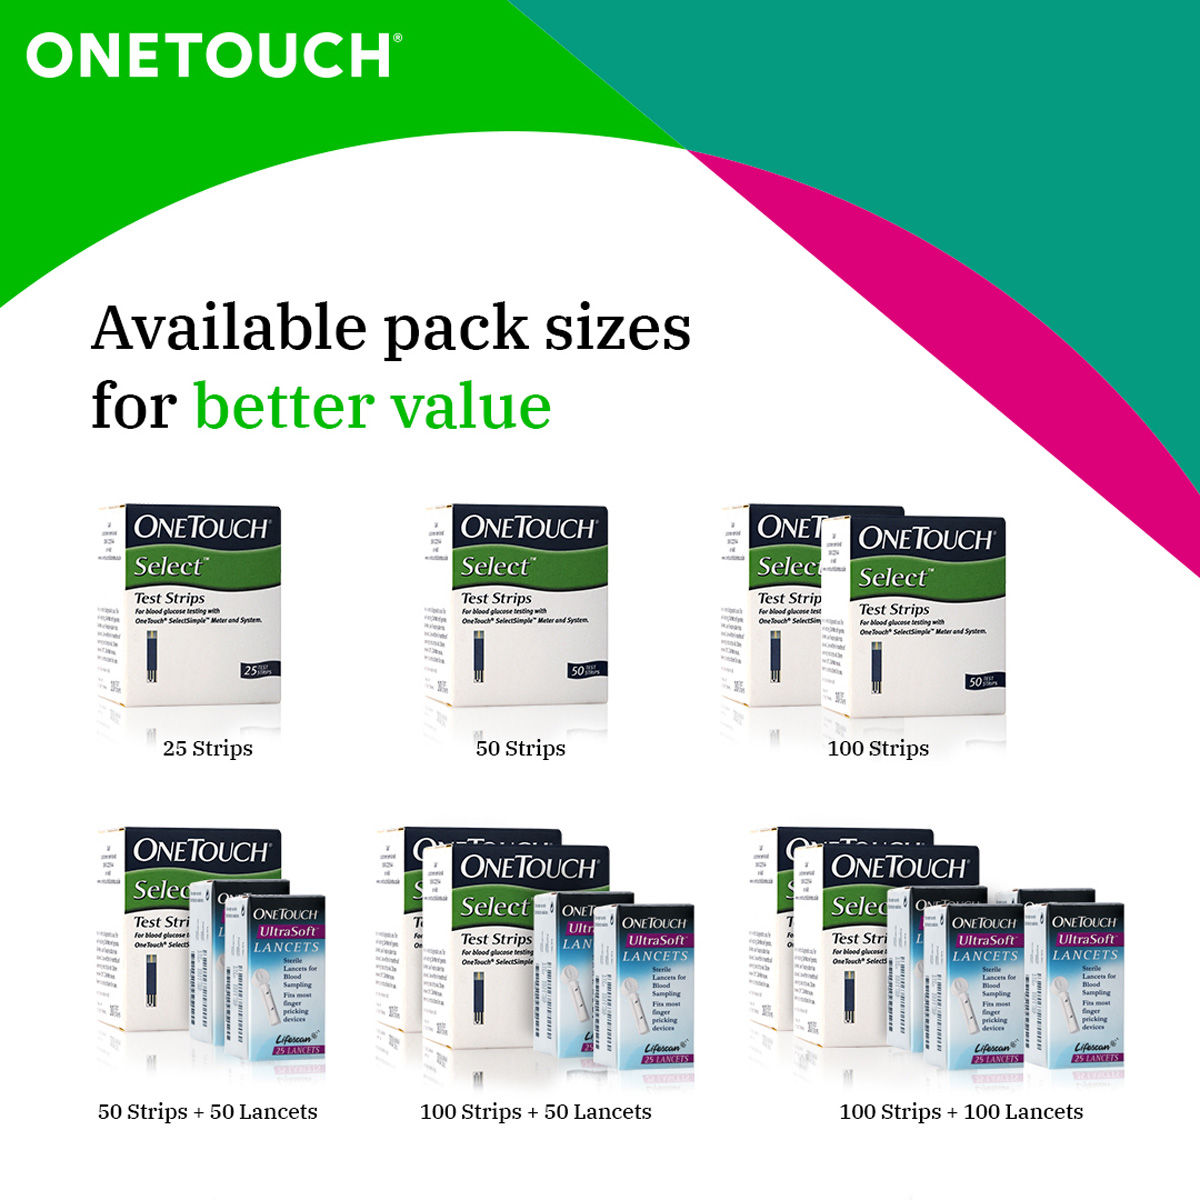 OneTouch Select Test Strips, 50 Count, Pack of 1 